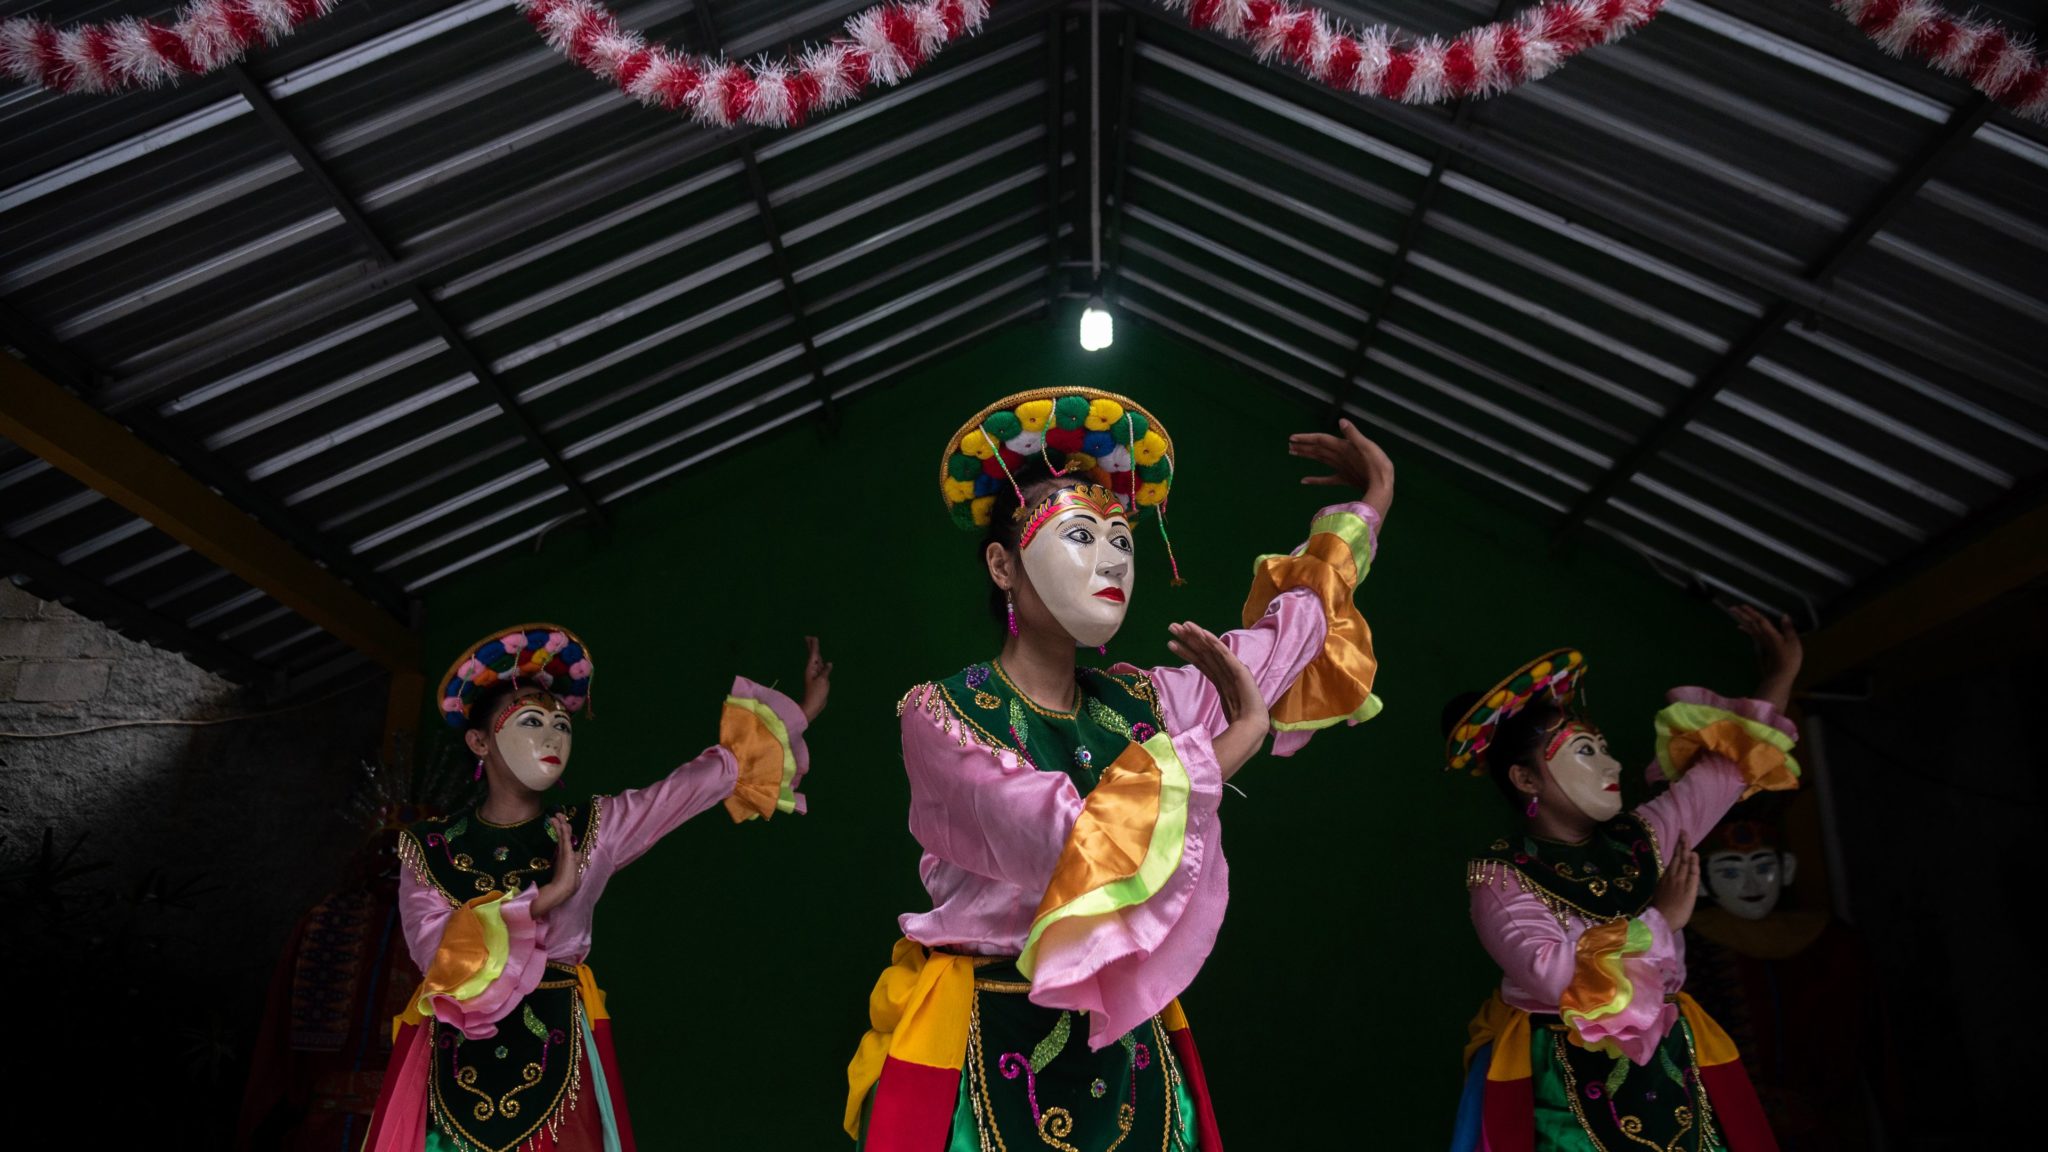 The Masked Dancers of Indonesia